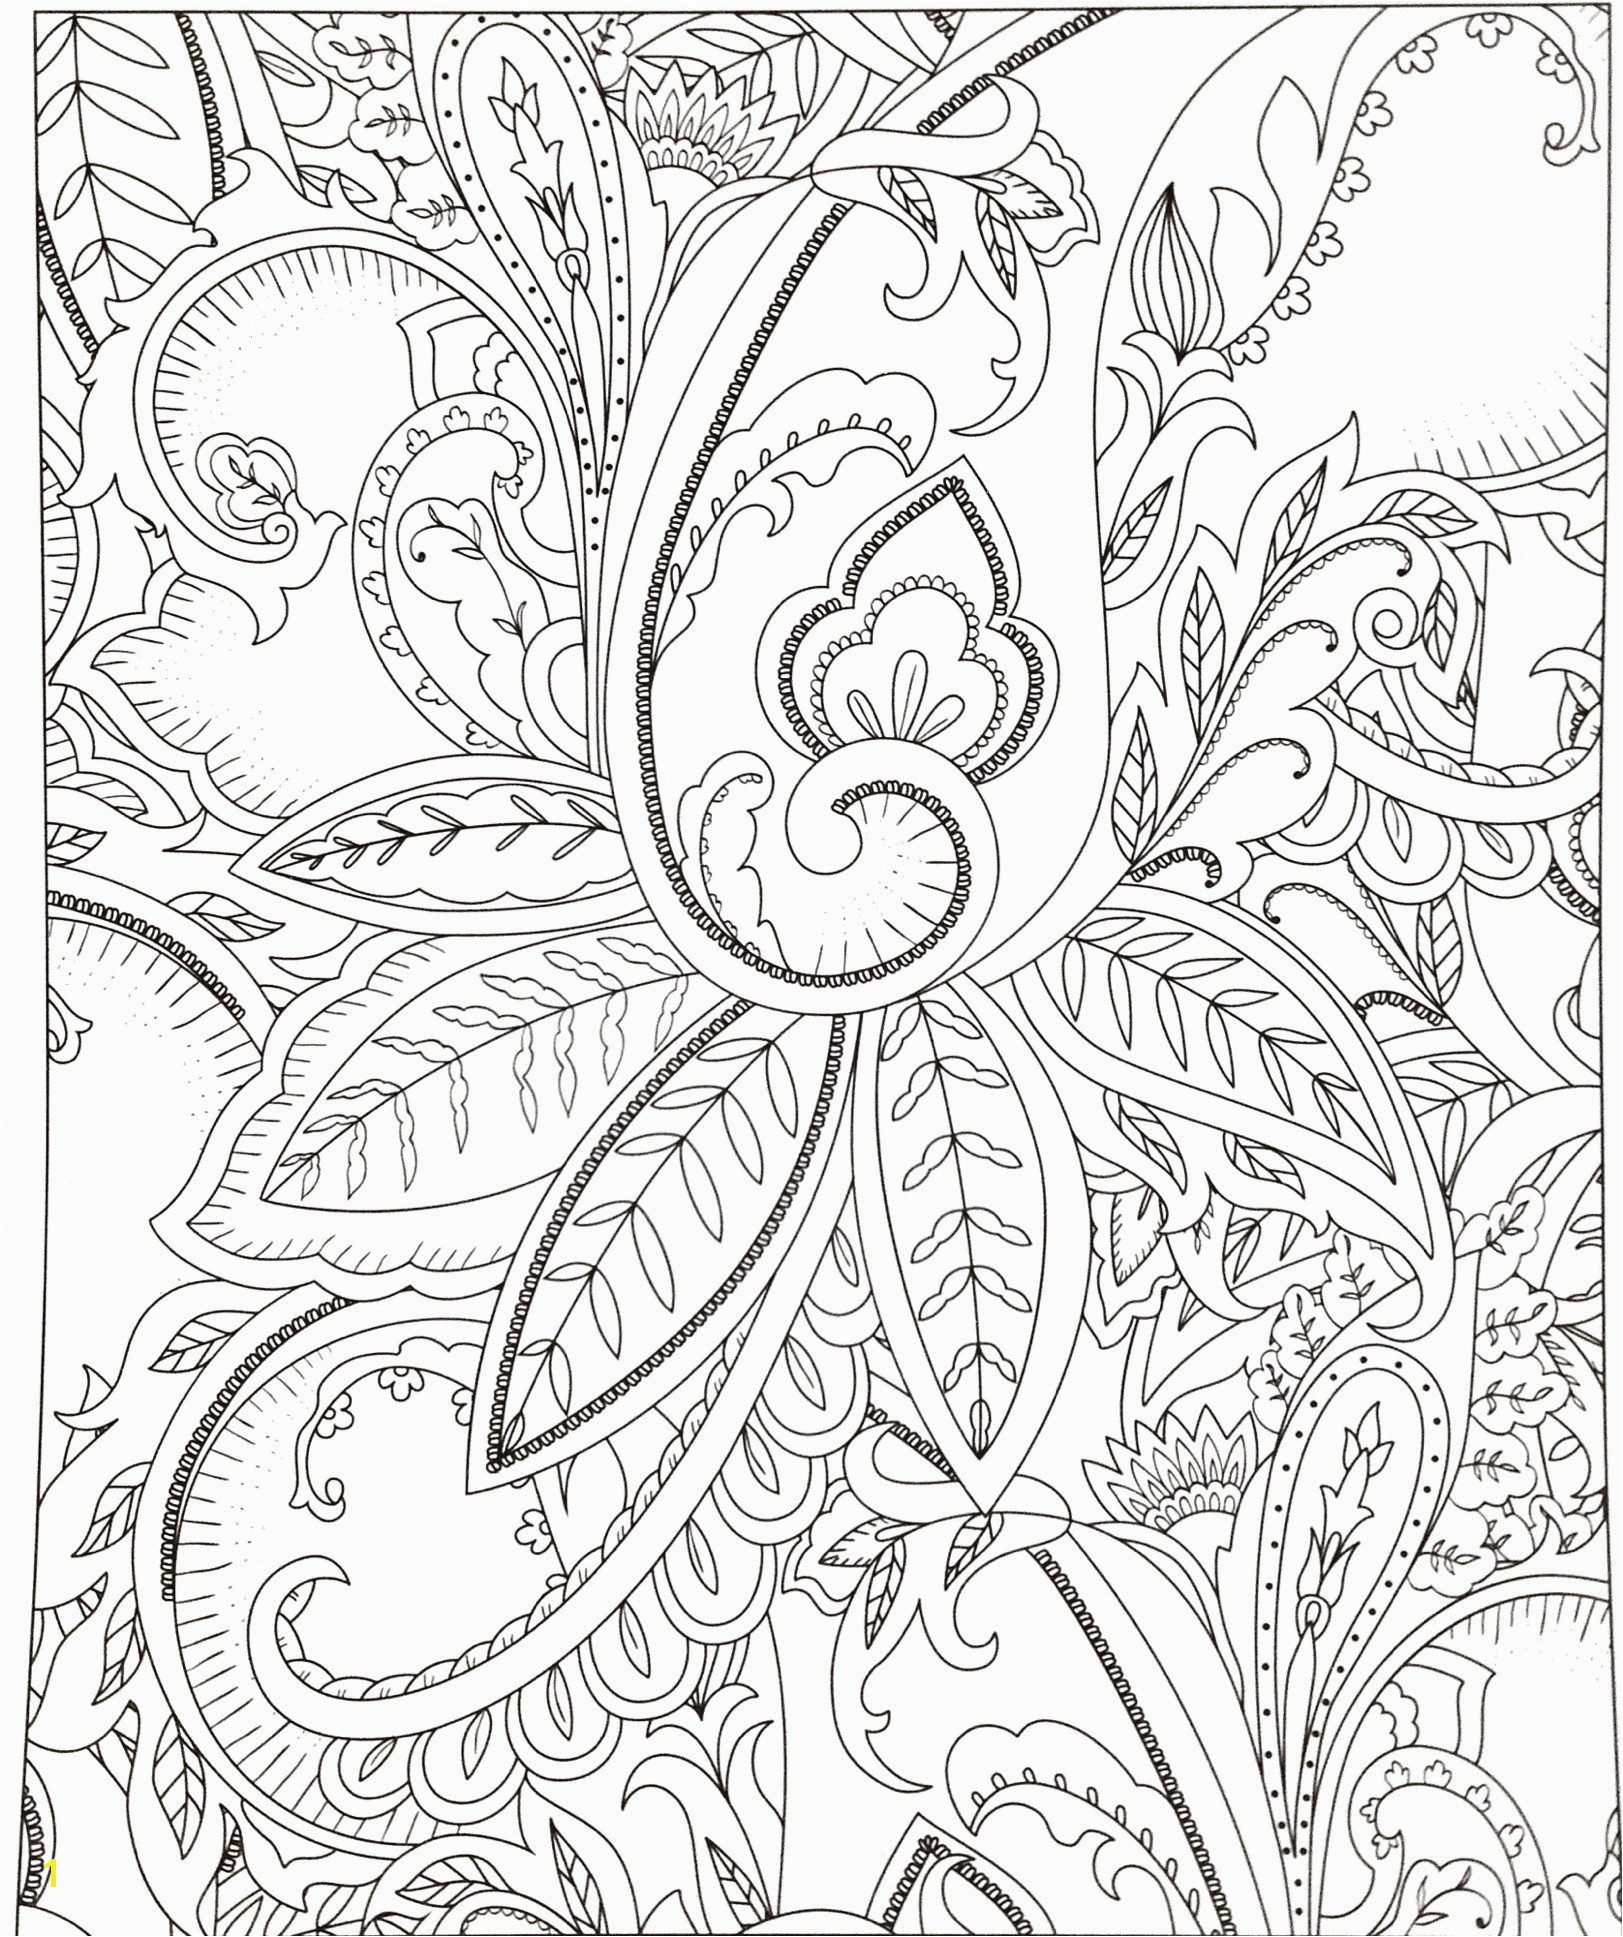 11 Unique Pictures Of Yellow Roses In A Vase 2024 free download pictures of yellow roses in a vase of pretty coloring pages of flowers zabelyesayan com with cool vases flower vase coloring page pages flowers in a top i 0d